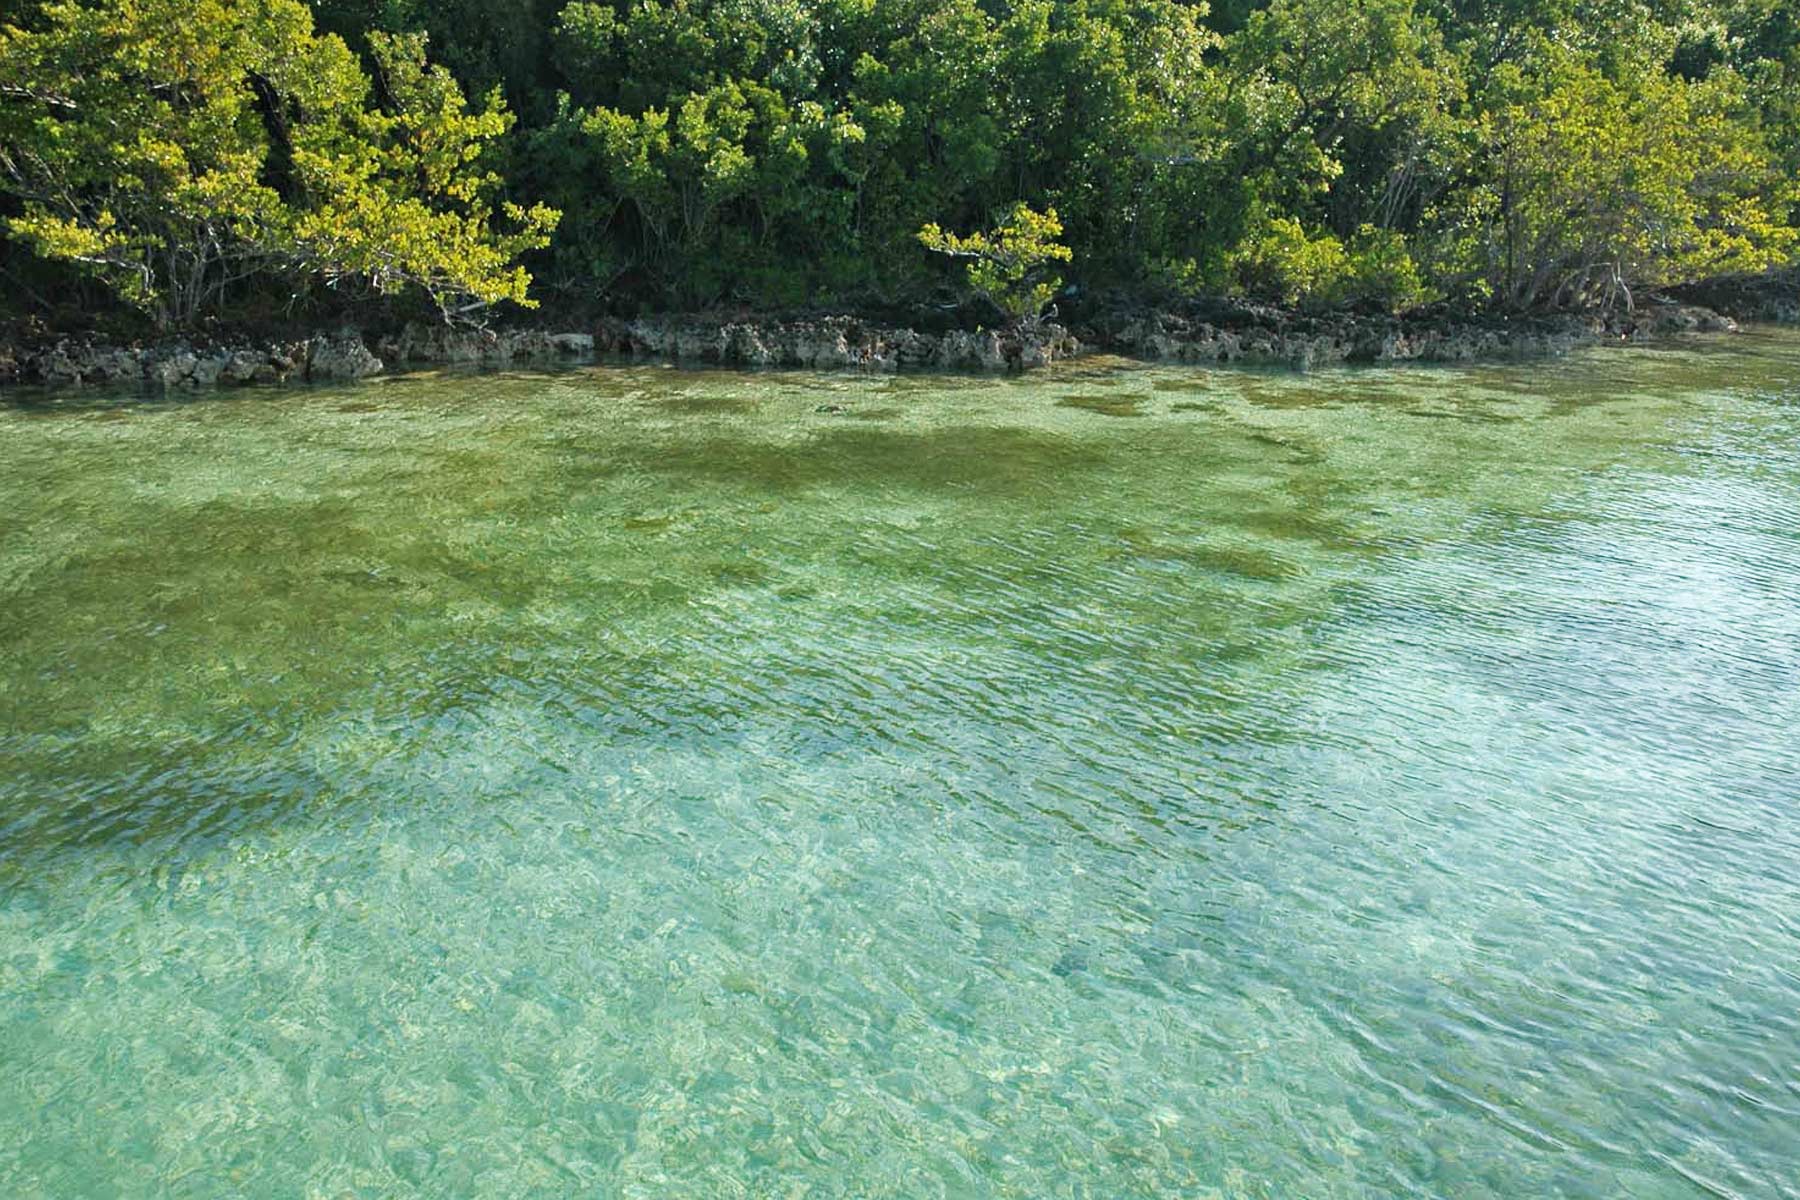 elliott key in biscayne bay, things to do in biscayne national park